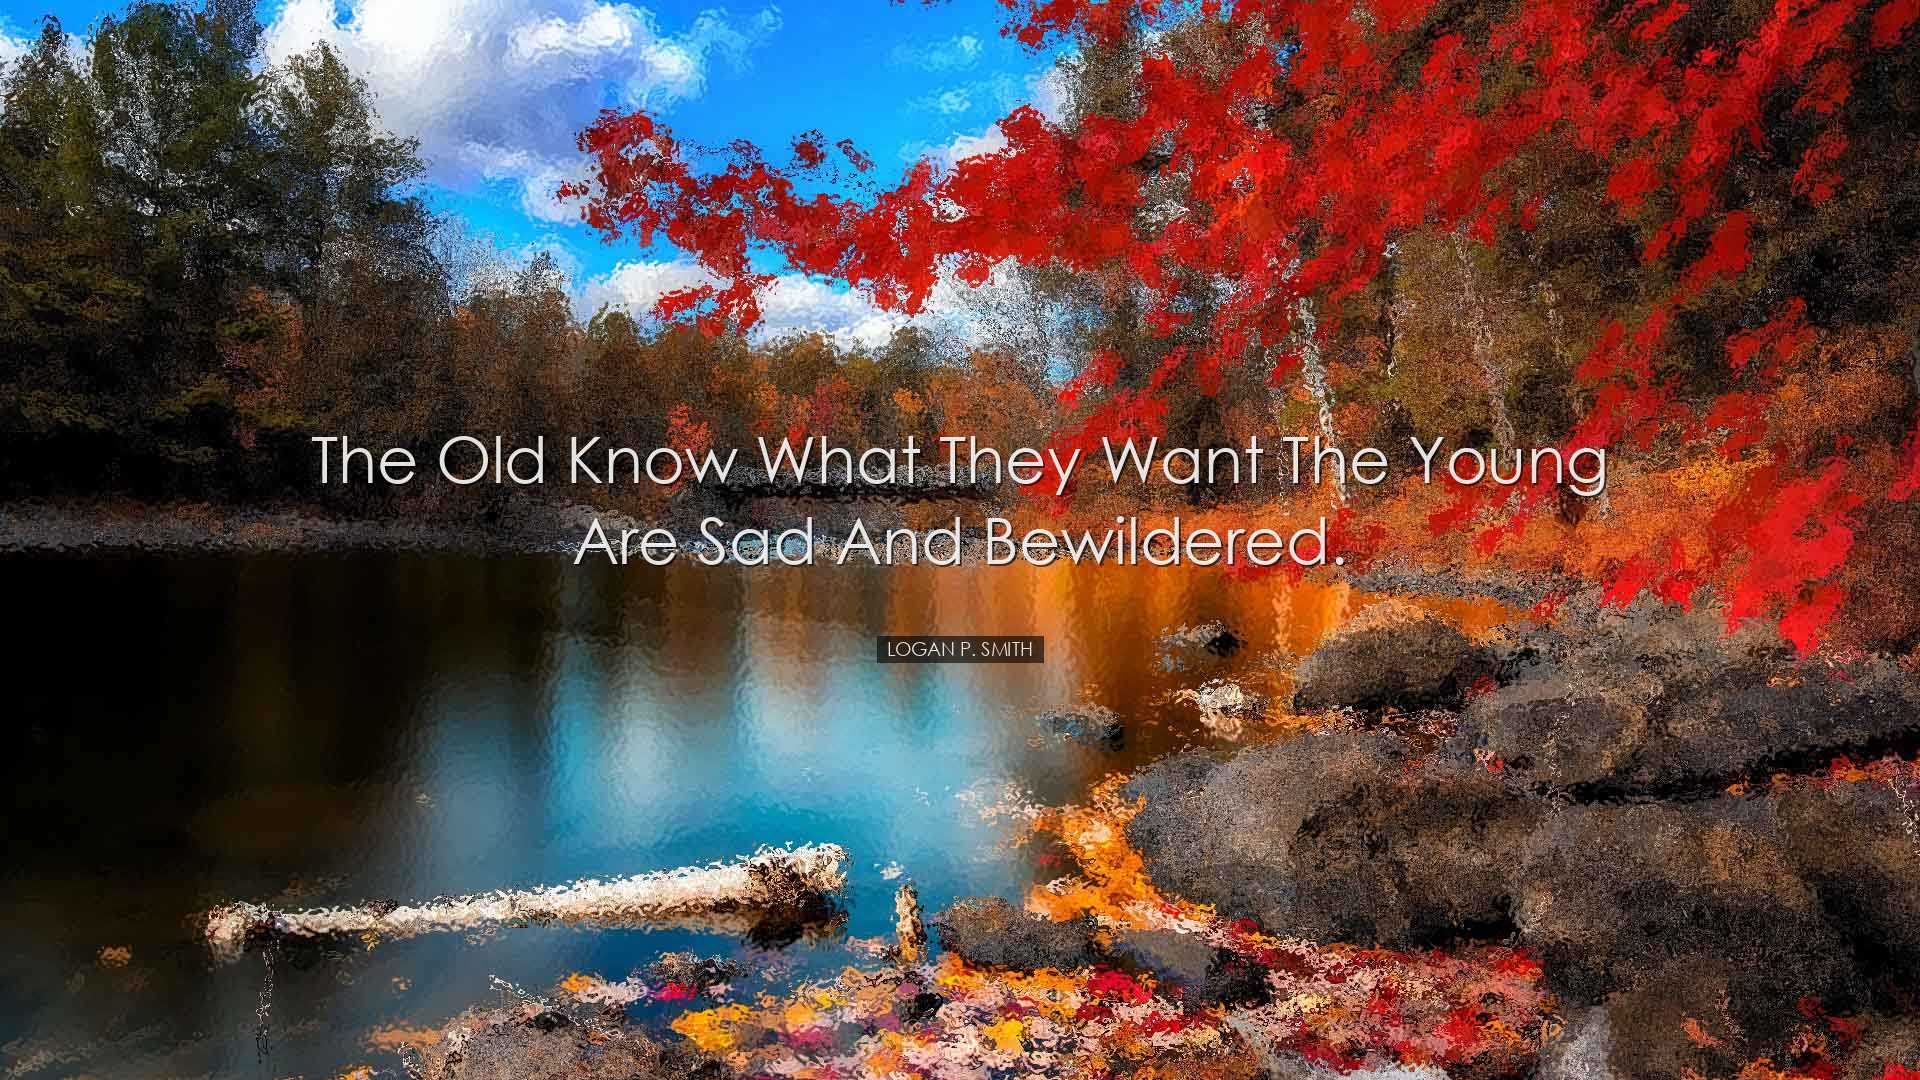 The old know what they want the young are sad and bewildered. - Lo